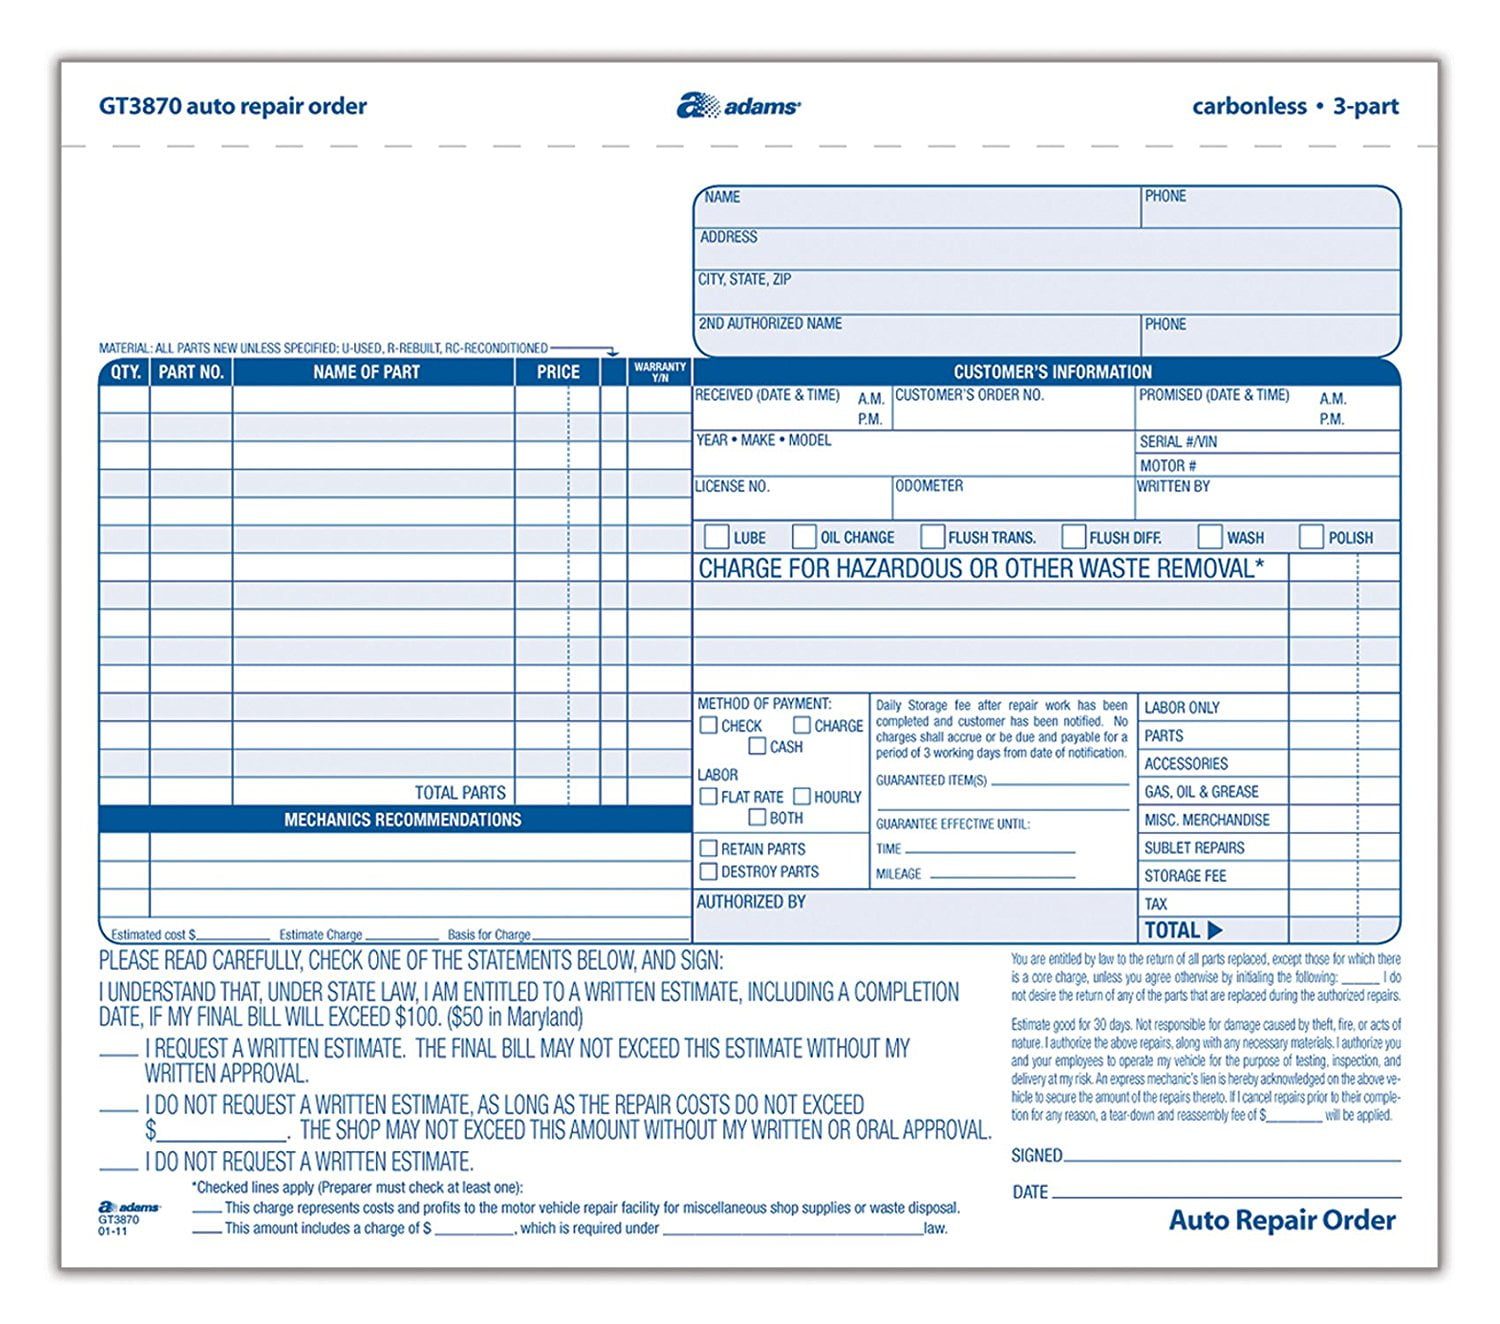 Auto Repair Order Forms 8 5 X 7 44 Inch 3 Part Carbonless 50 Pack White And Canary Gt3870 Auto Repair Order Form Provides Space For All Auto Service Jobs By Adams Ship From Us